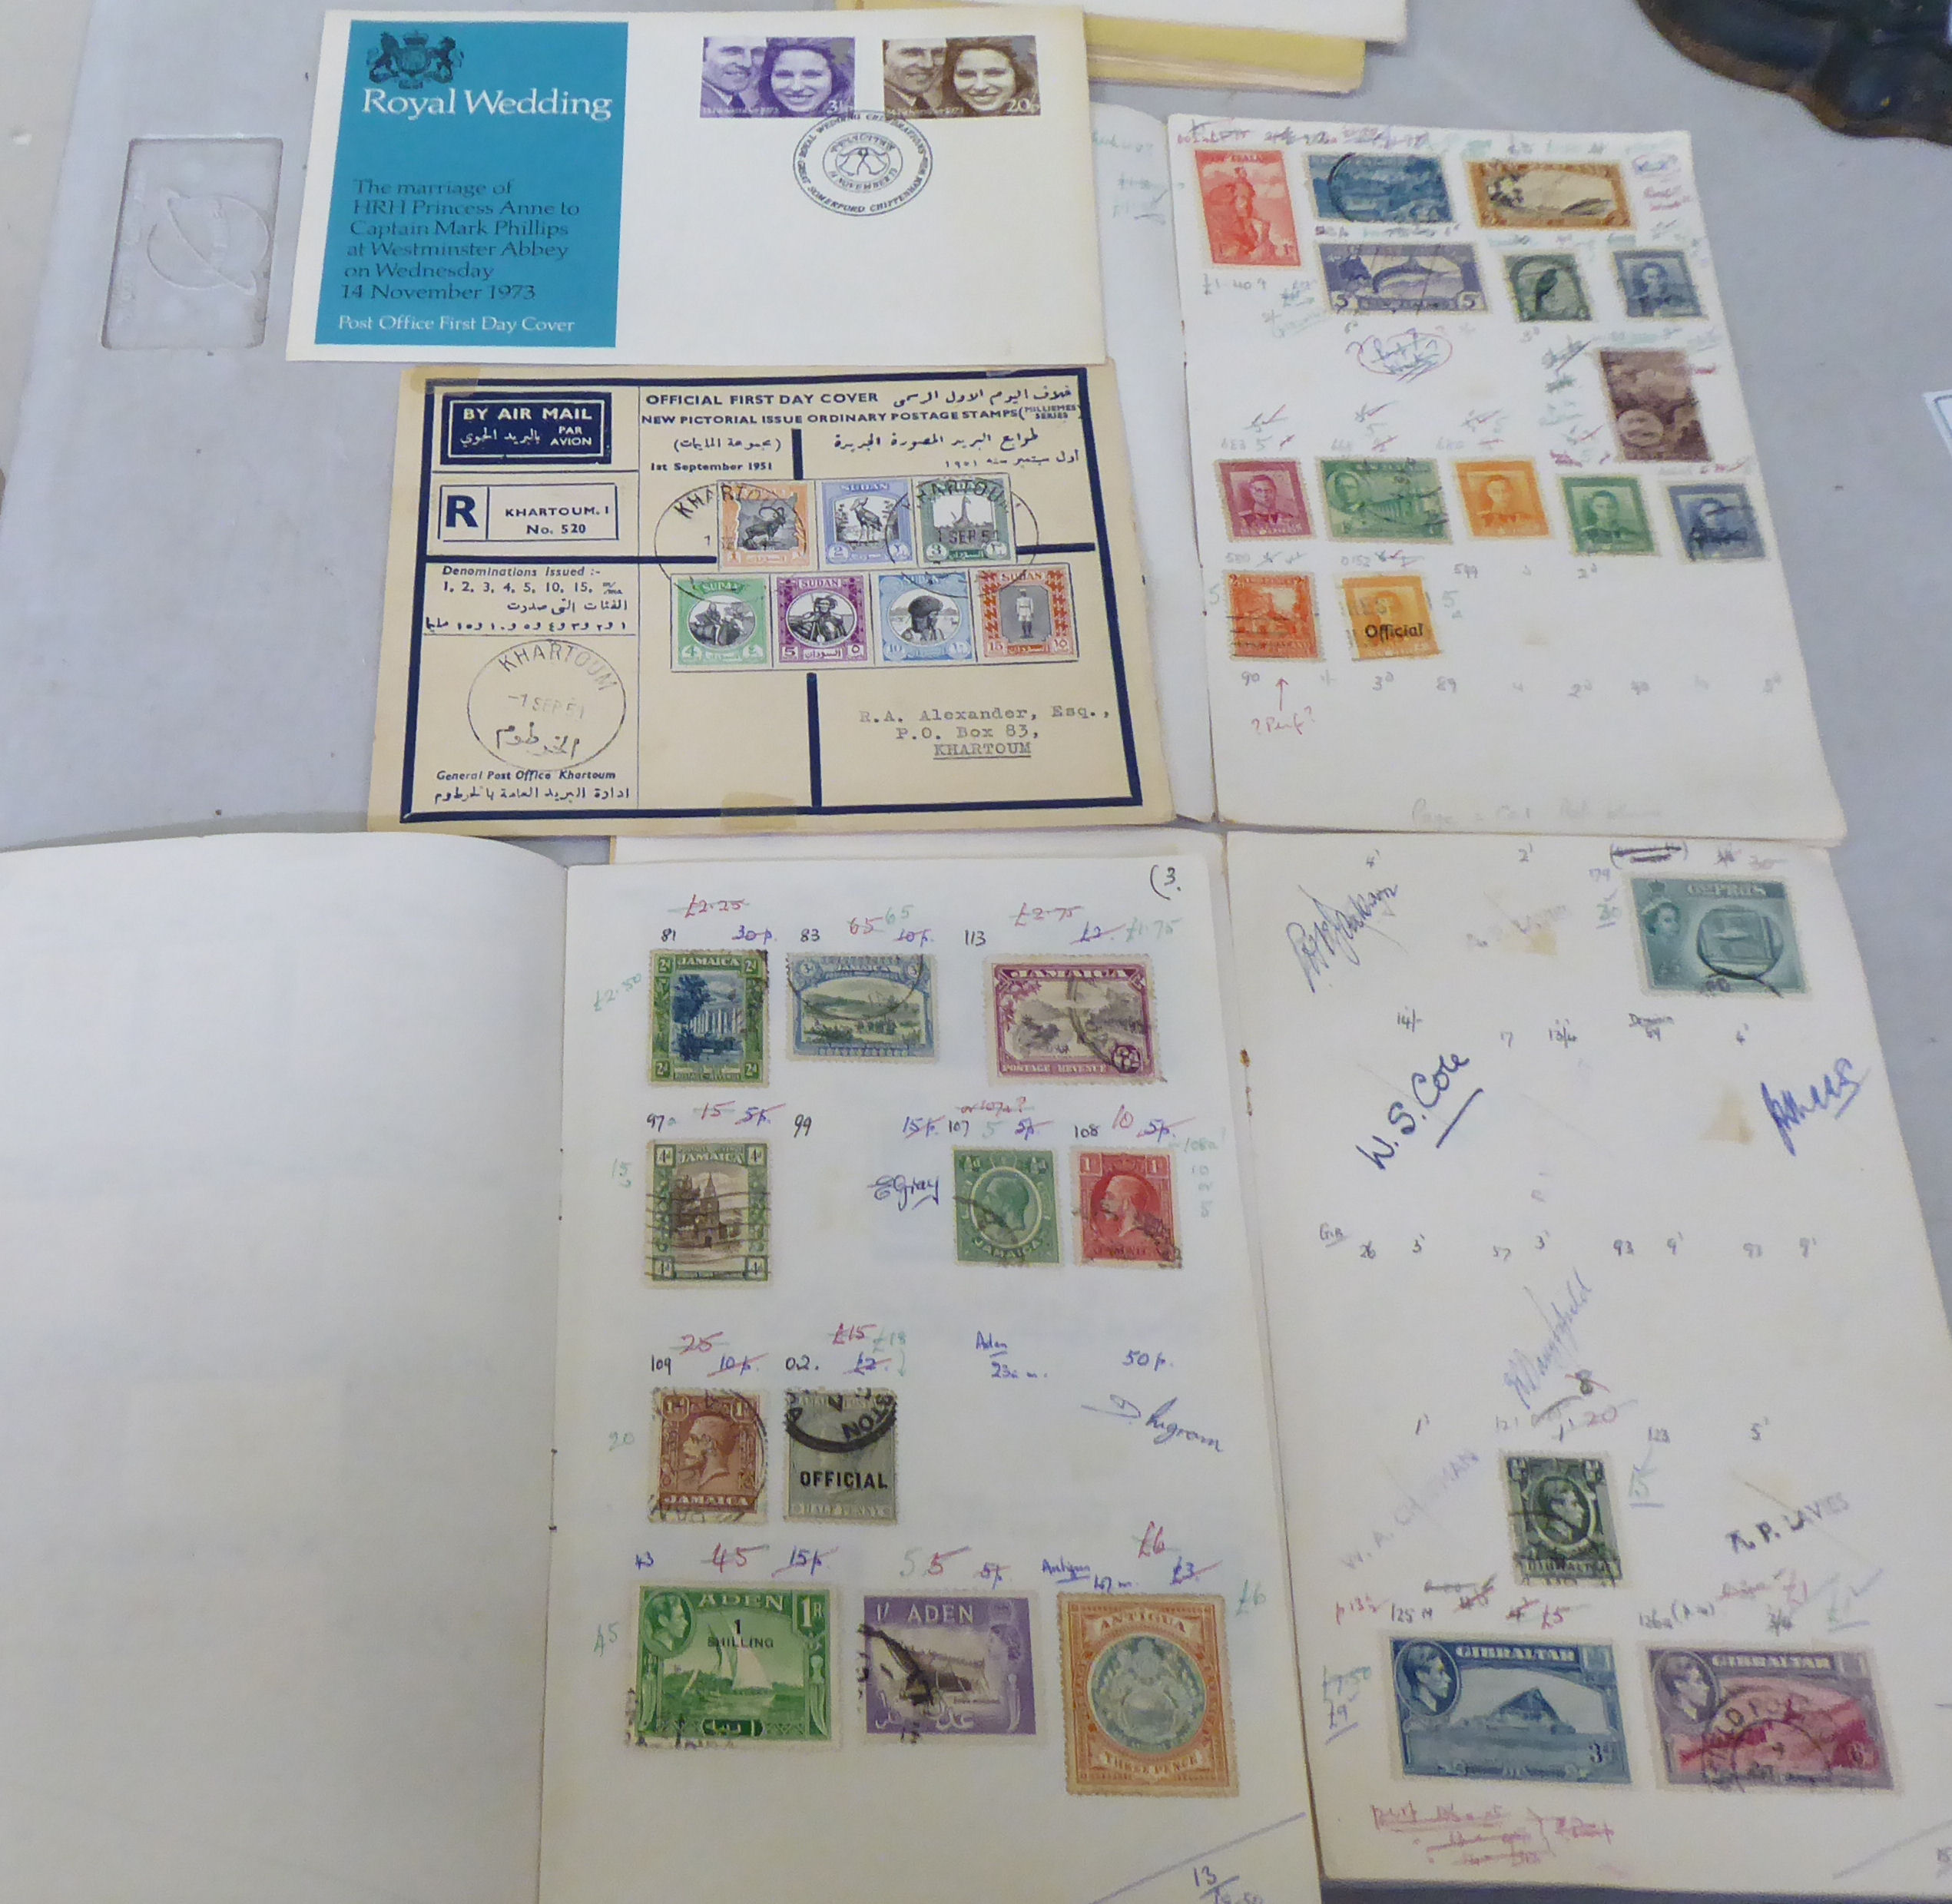 Uncollated postage stamps, British, Commonwealth and others - Image 2 of 4